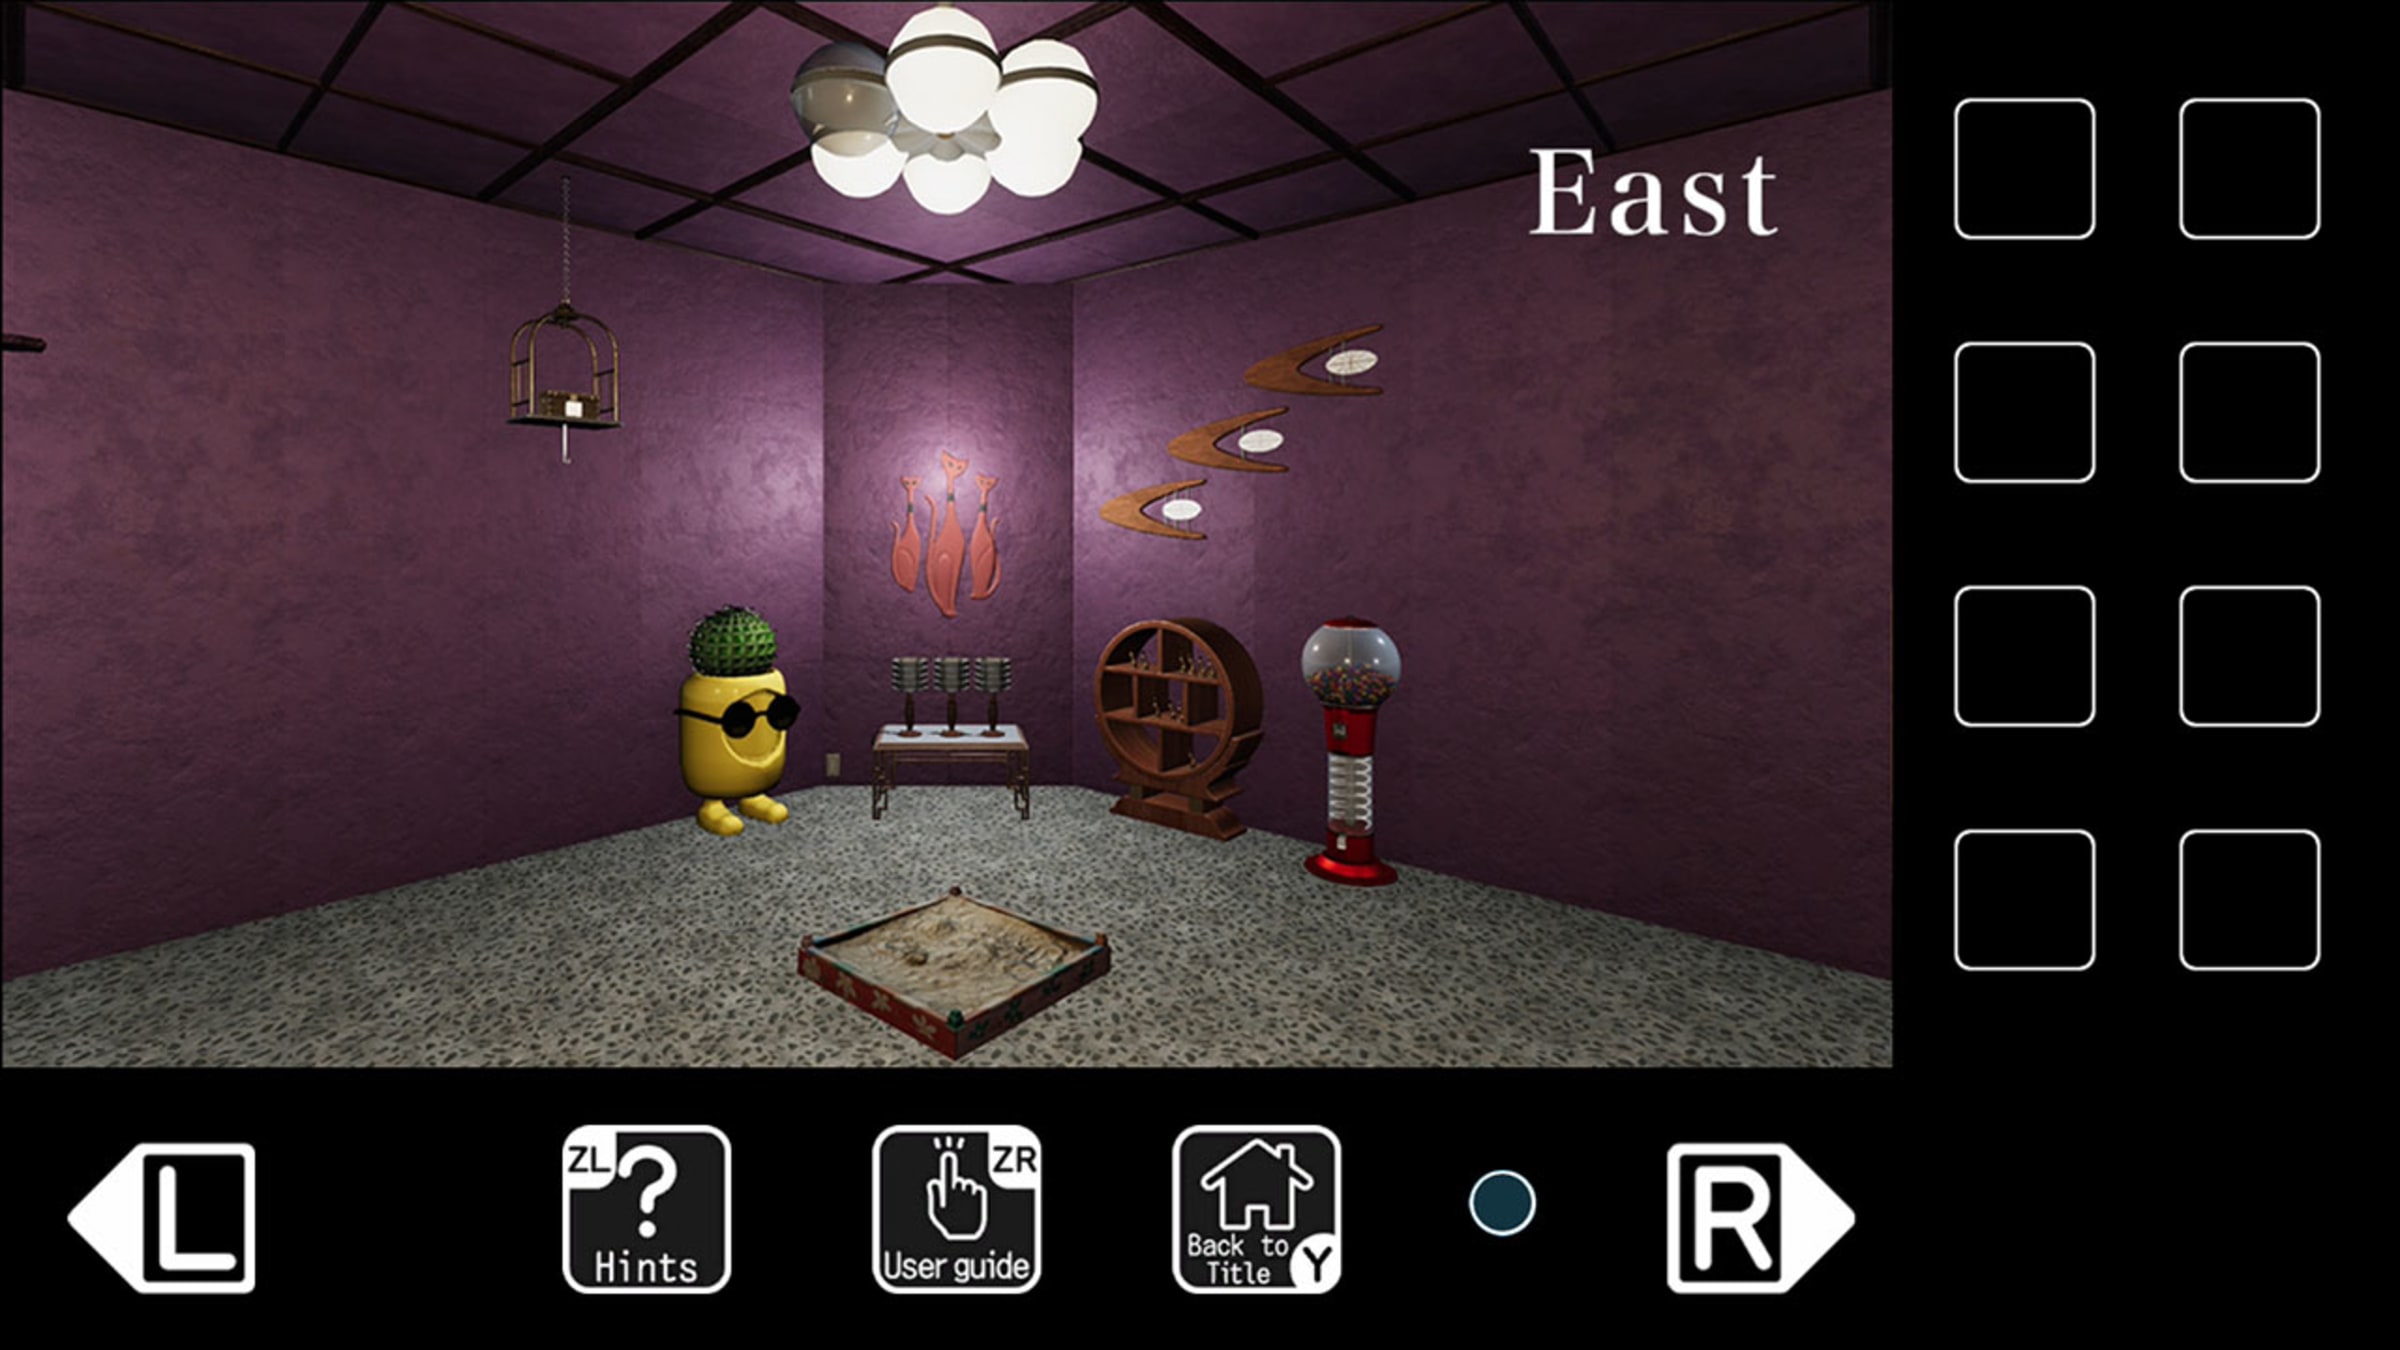 https://assets.nintendo.com/image/upload/c_fill,w_1200/q_auto:best/f_auto/dpr_2.0/ncom/en_US/games/switch/j/japanese-escape-games-the-room-without-doors-switch/